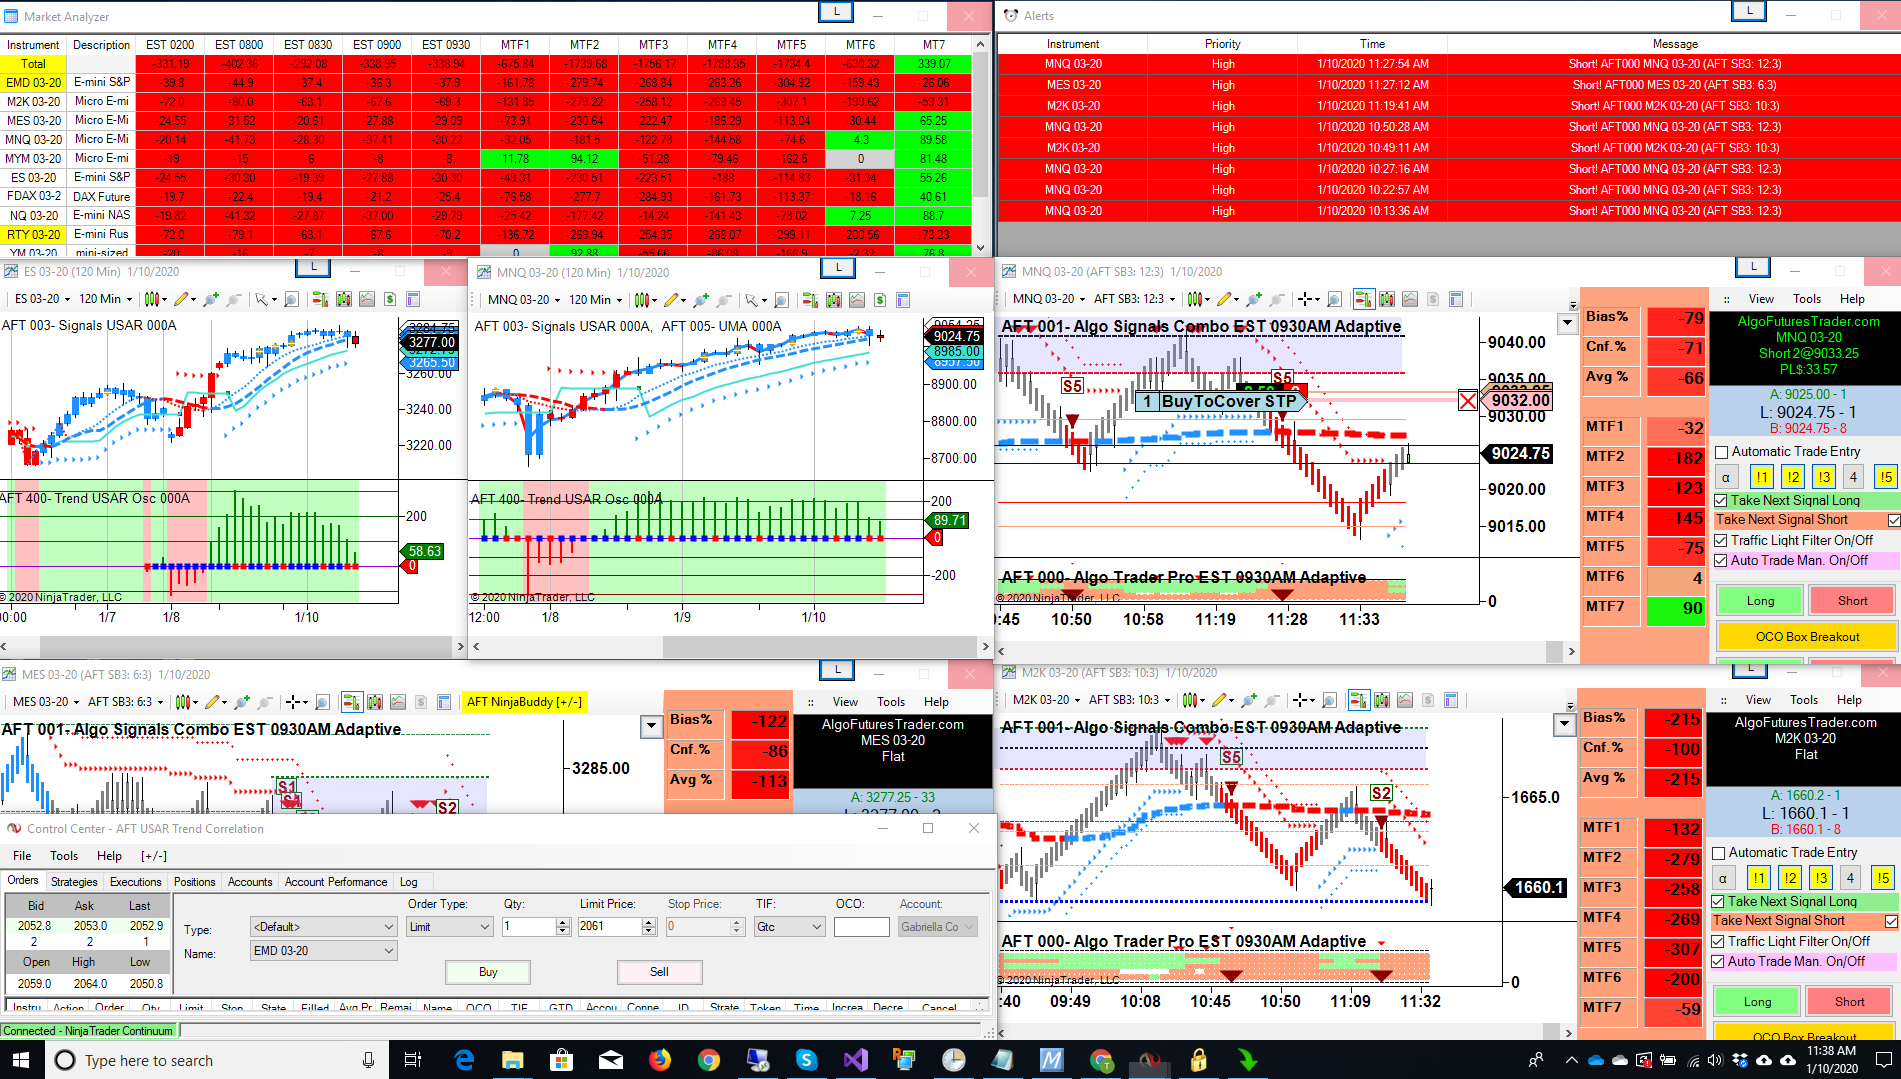 live day trading systems for futures - Algo Futures Trader